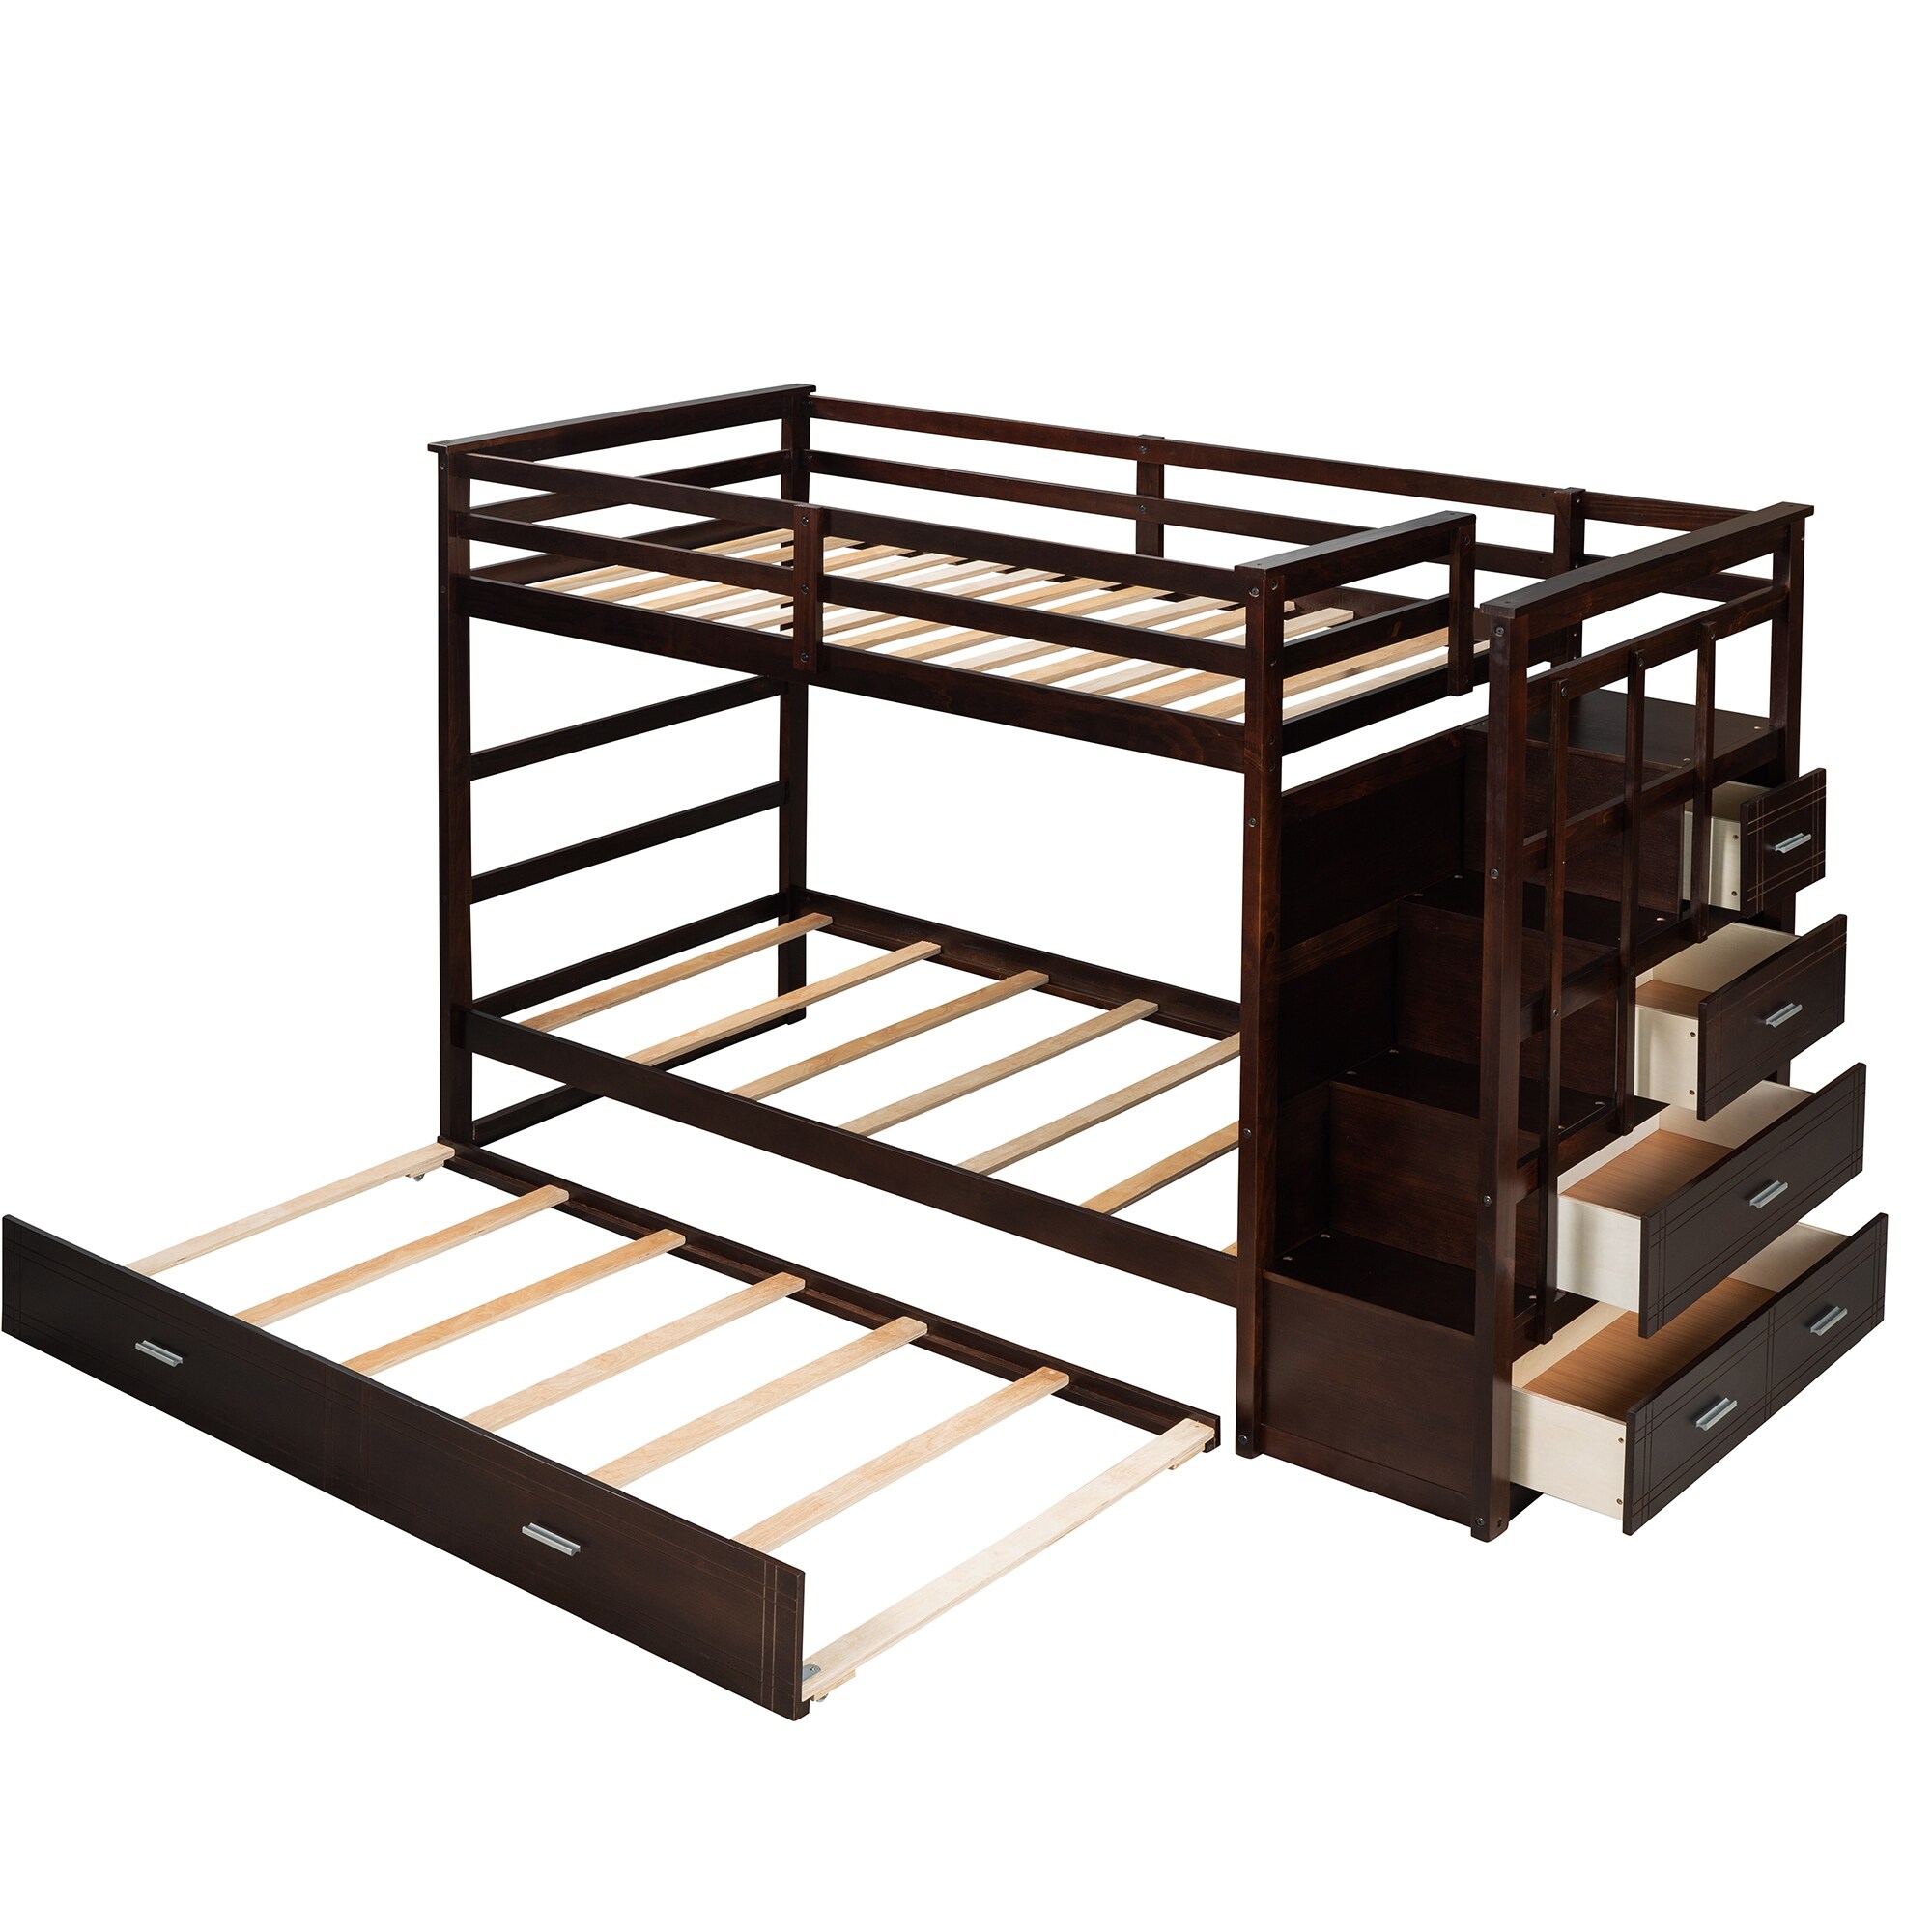 Full Size Daybed, Wooden Bedframe with Clean Lines